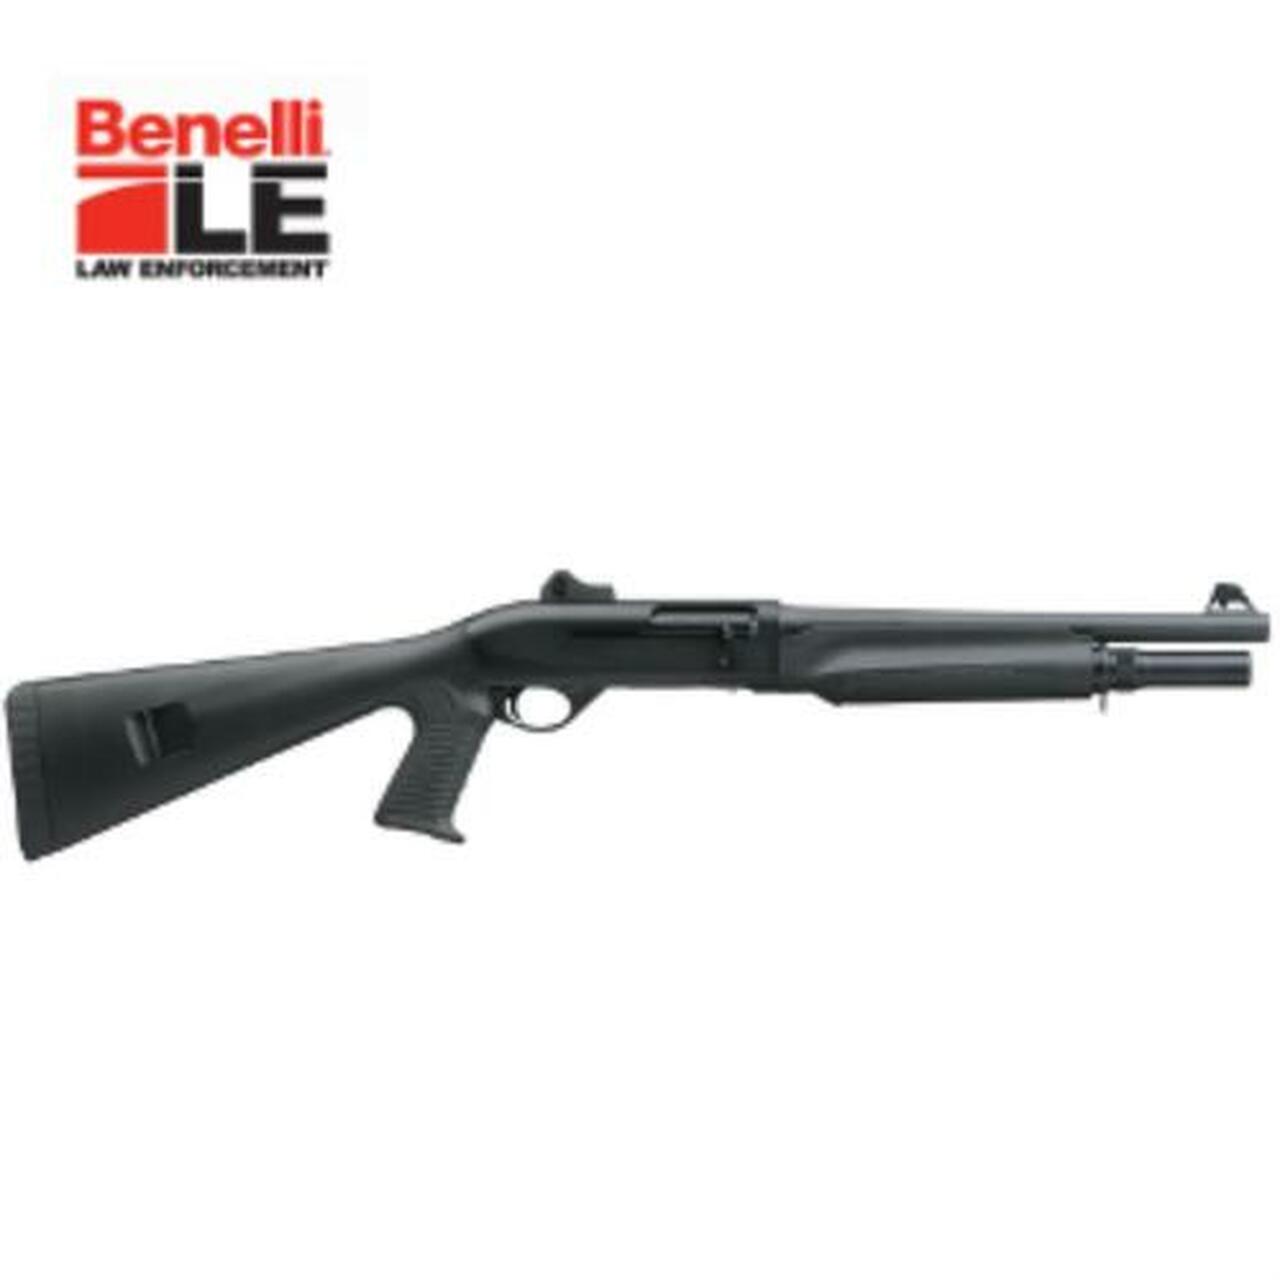 Image of Benelli M2 LE Entry 12 Ga, 14", Pistol Grip, Black Synthetic, NFA Rules Apply, LIMITED SUPPLY